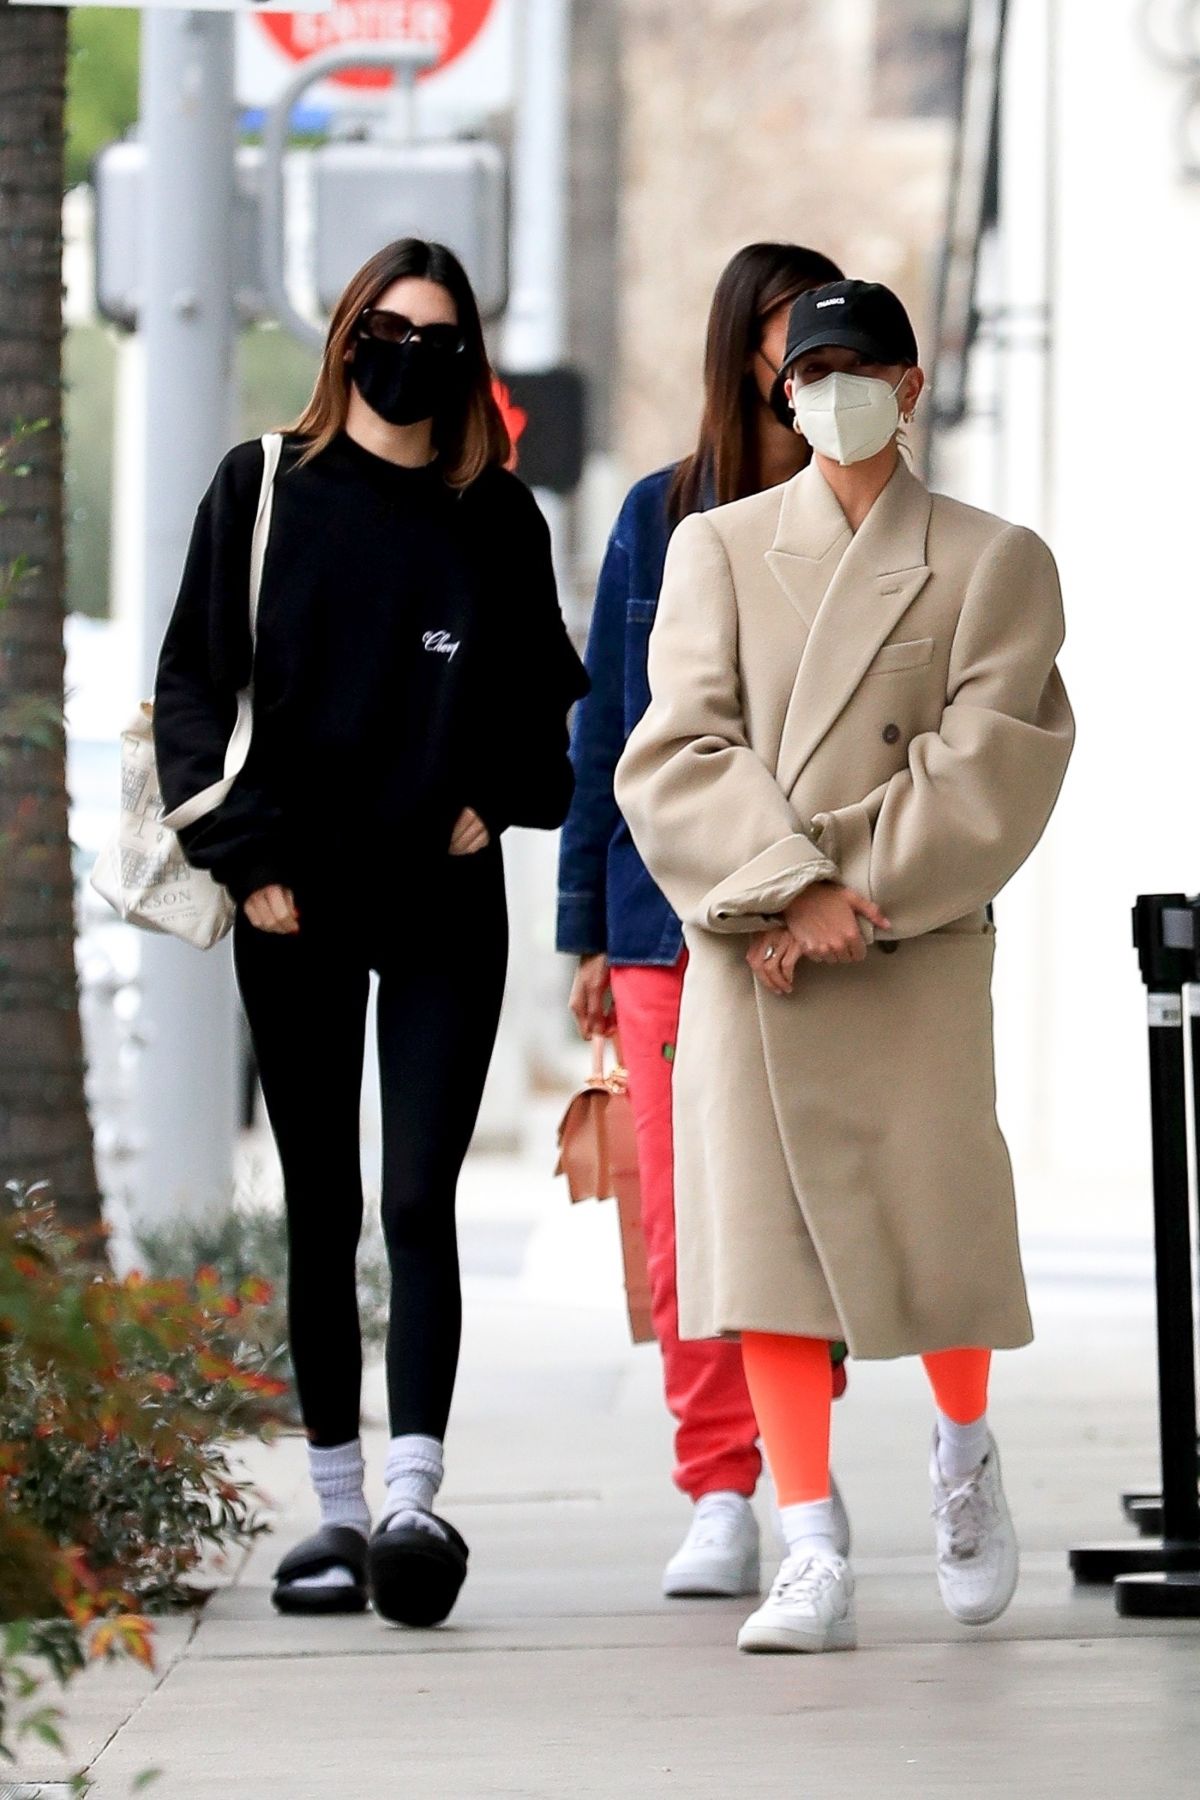 hailey-bieber-and-kendall-jenner-out-for-lunch-in-west-hollywood-02-01-2021-9.jpg